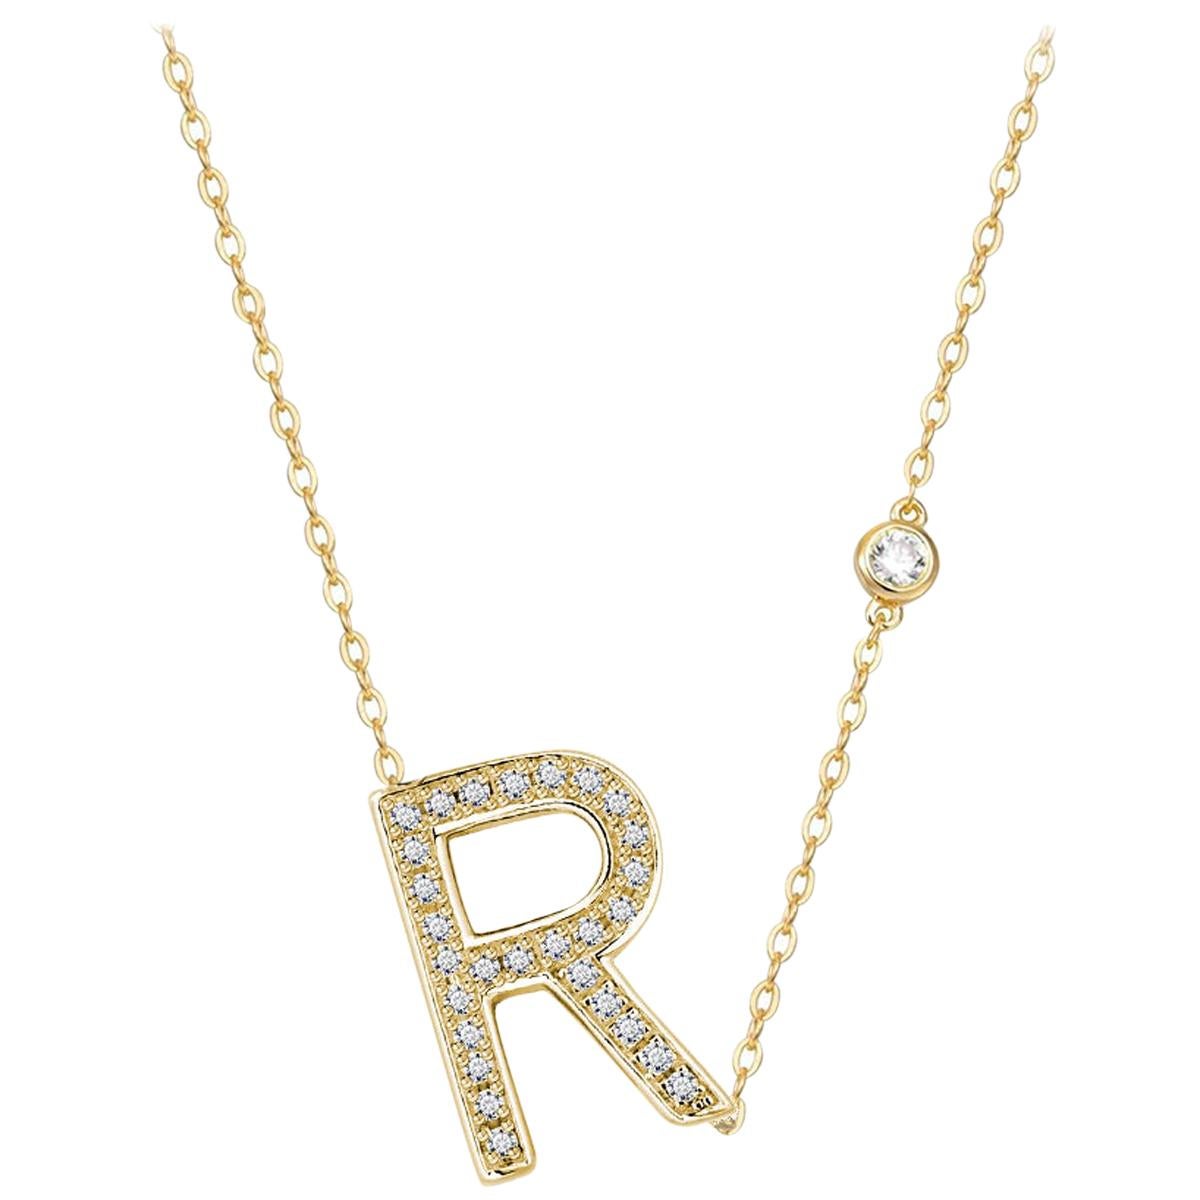 R Initial Bezel Chain Necklace For Sale